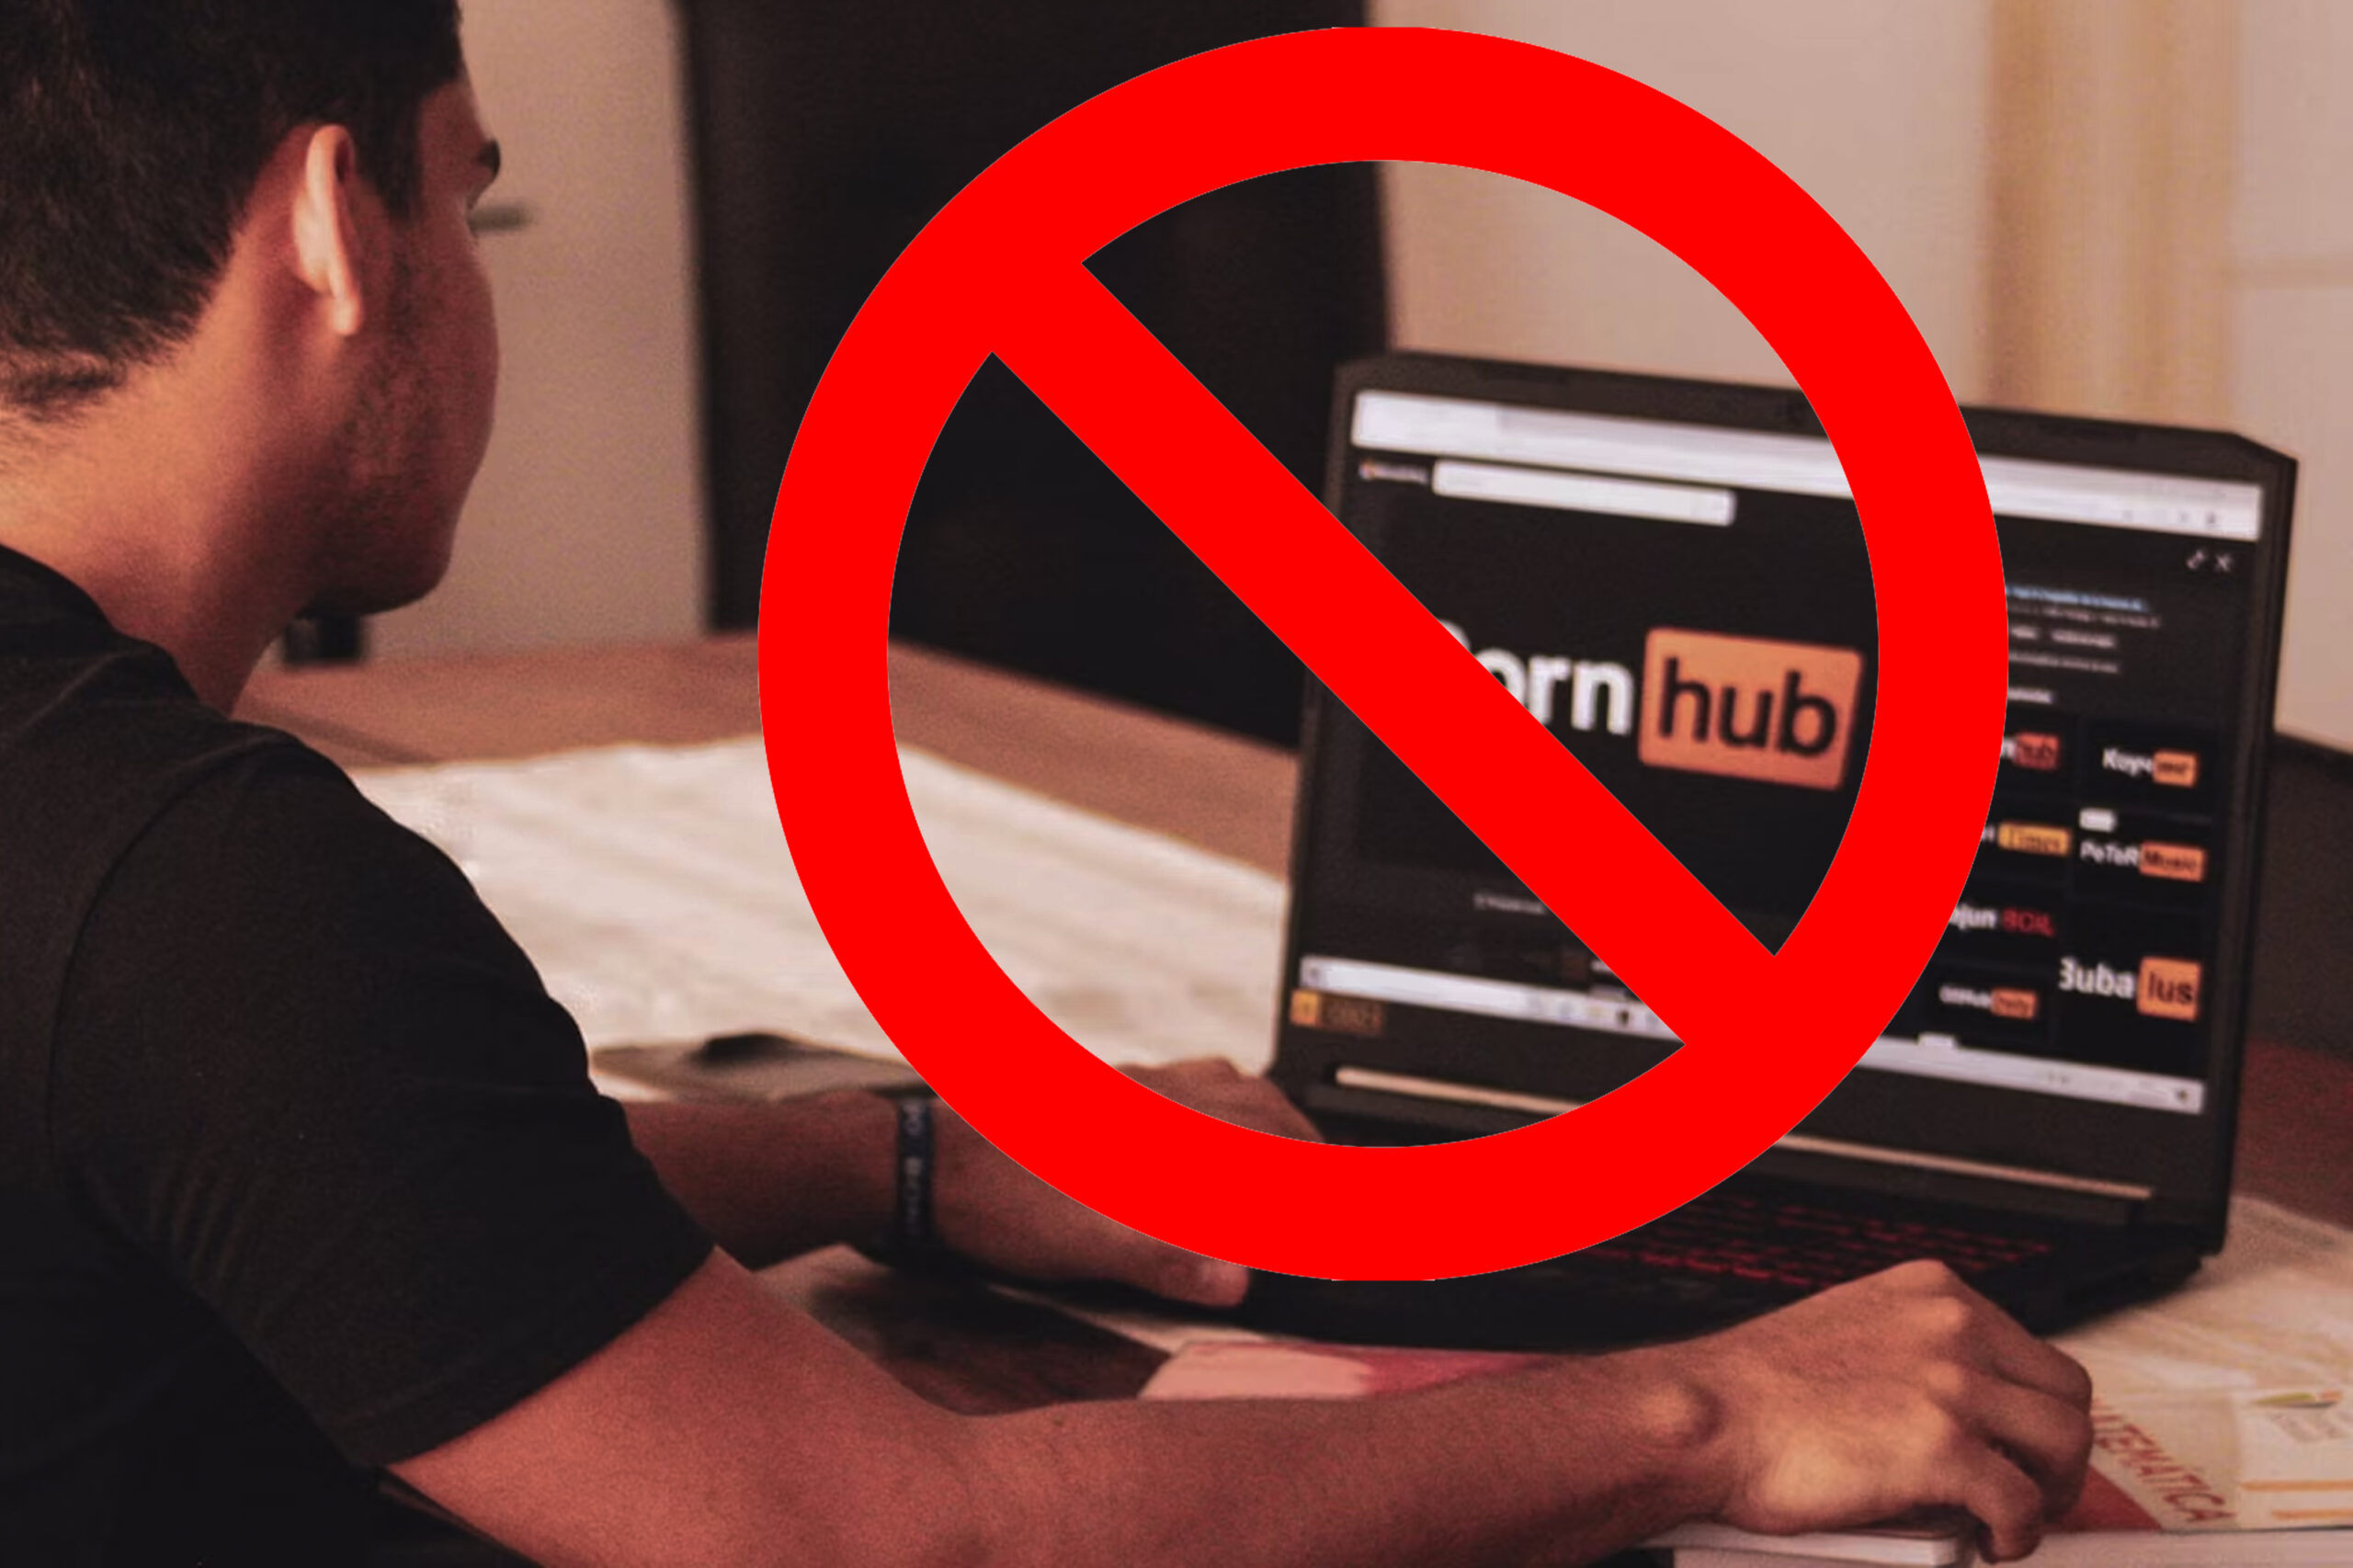 Pornhub Blocks Access In Utah Because of States New Age Verification Law -  RELEVANT